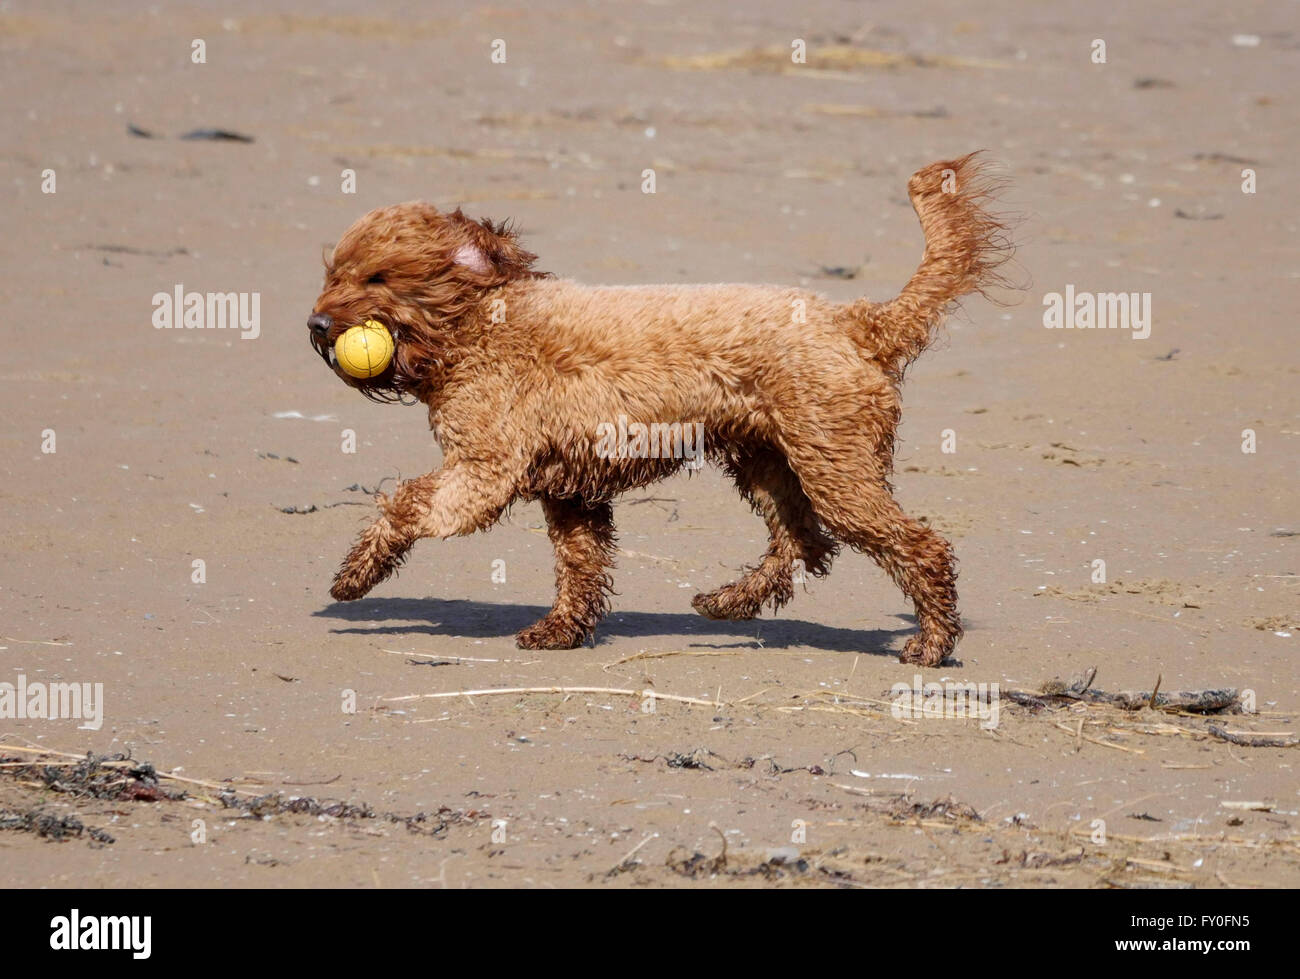 UK Weather Cold changeable  Spring day Ainsdale Beach Merseyside.6 April 2016. Cold, windy changeable  conditions on Ainsdale Beach. © Alan Edwards/Alamy Live News Stock Photo